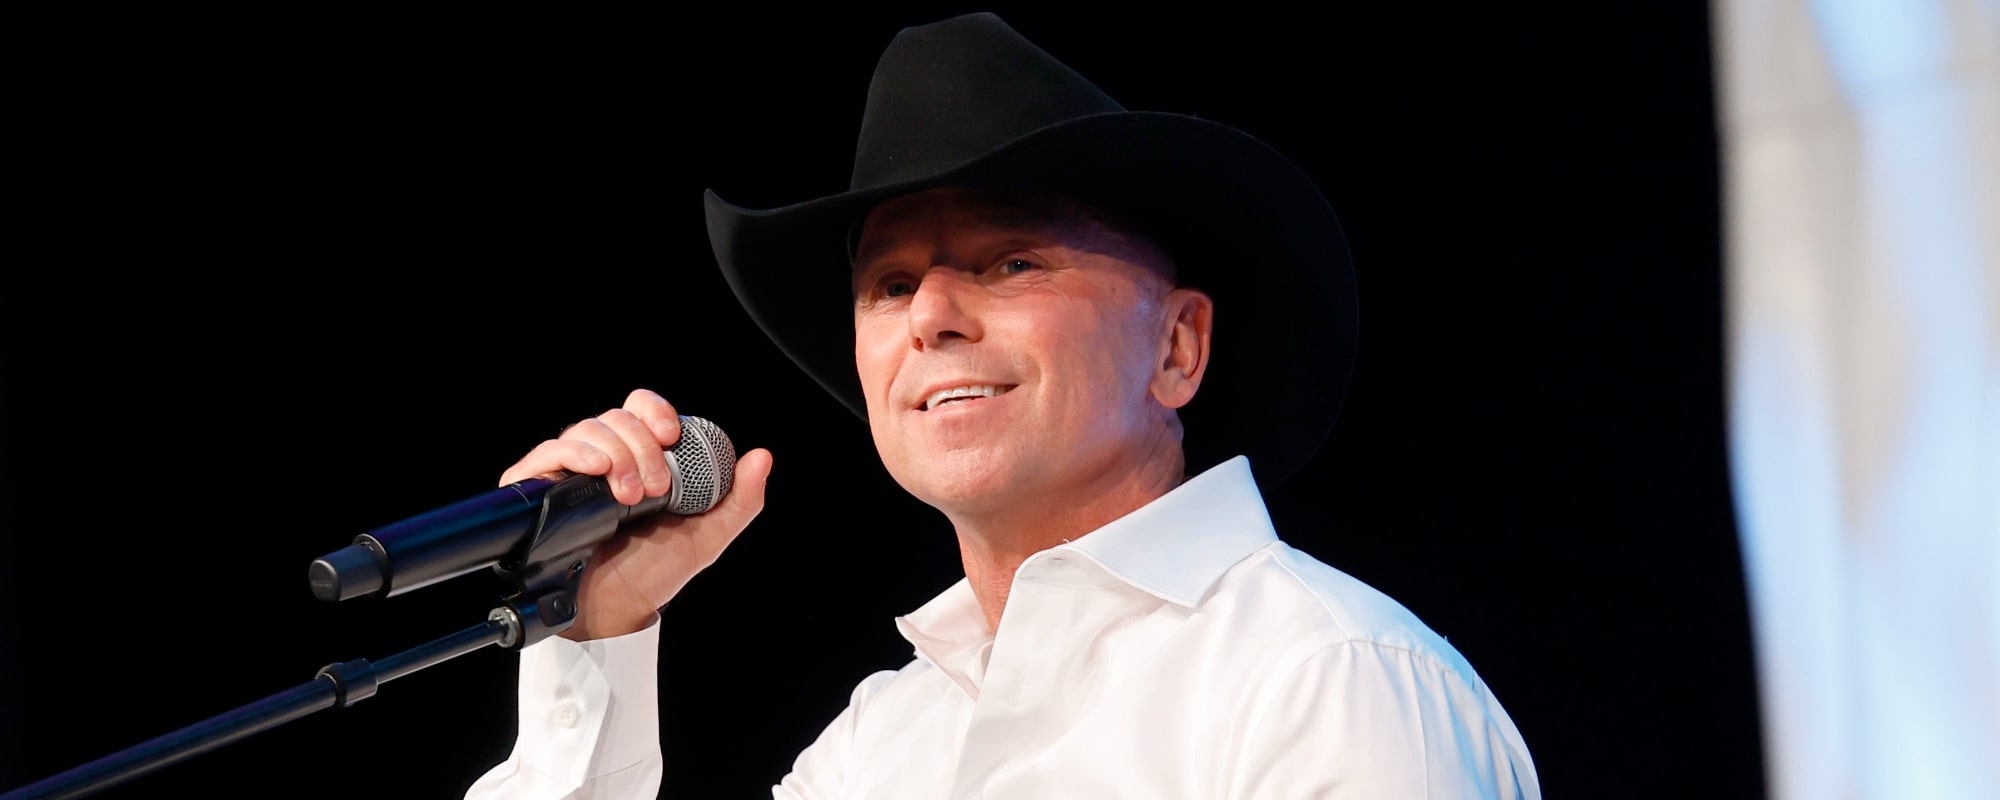 Kenny Chesney Looks Back on Some of His First Gigs Playing for Tips and Free Enchiladas in Johnson City, Tennessee